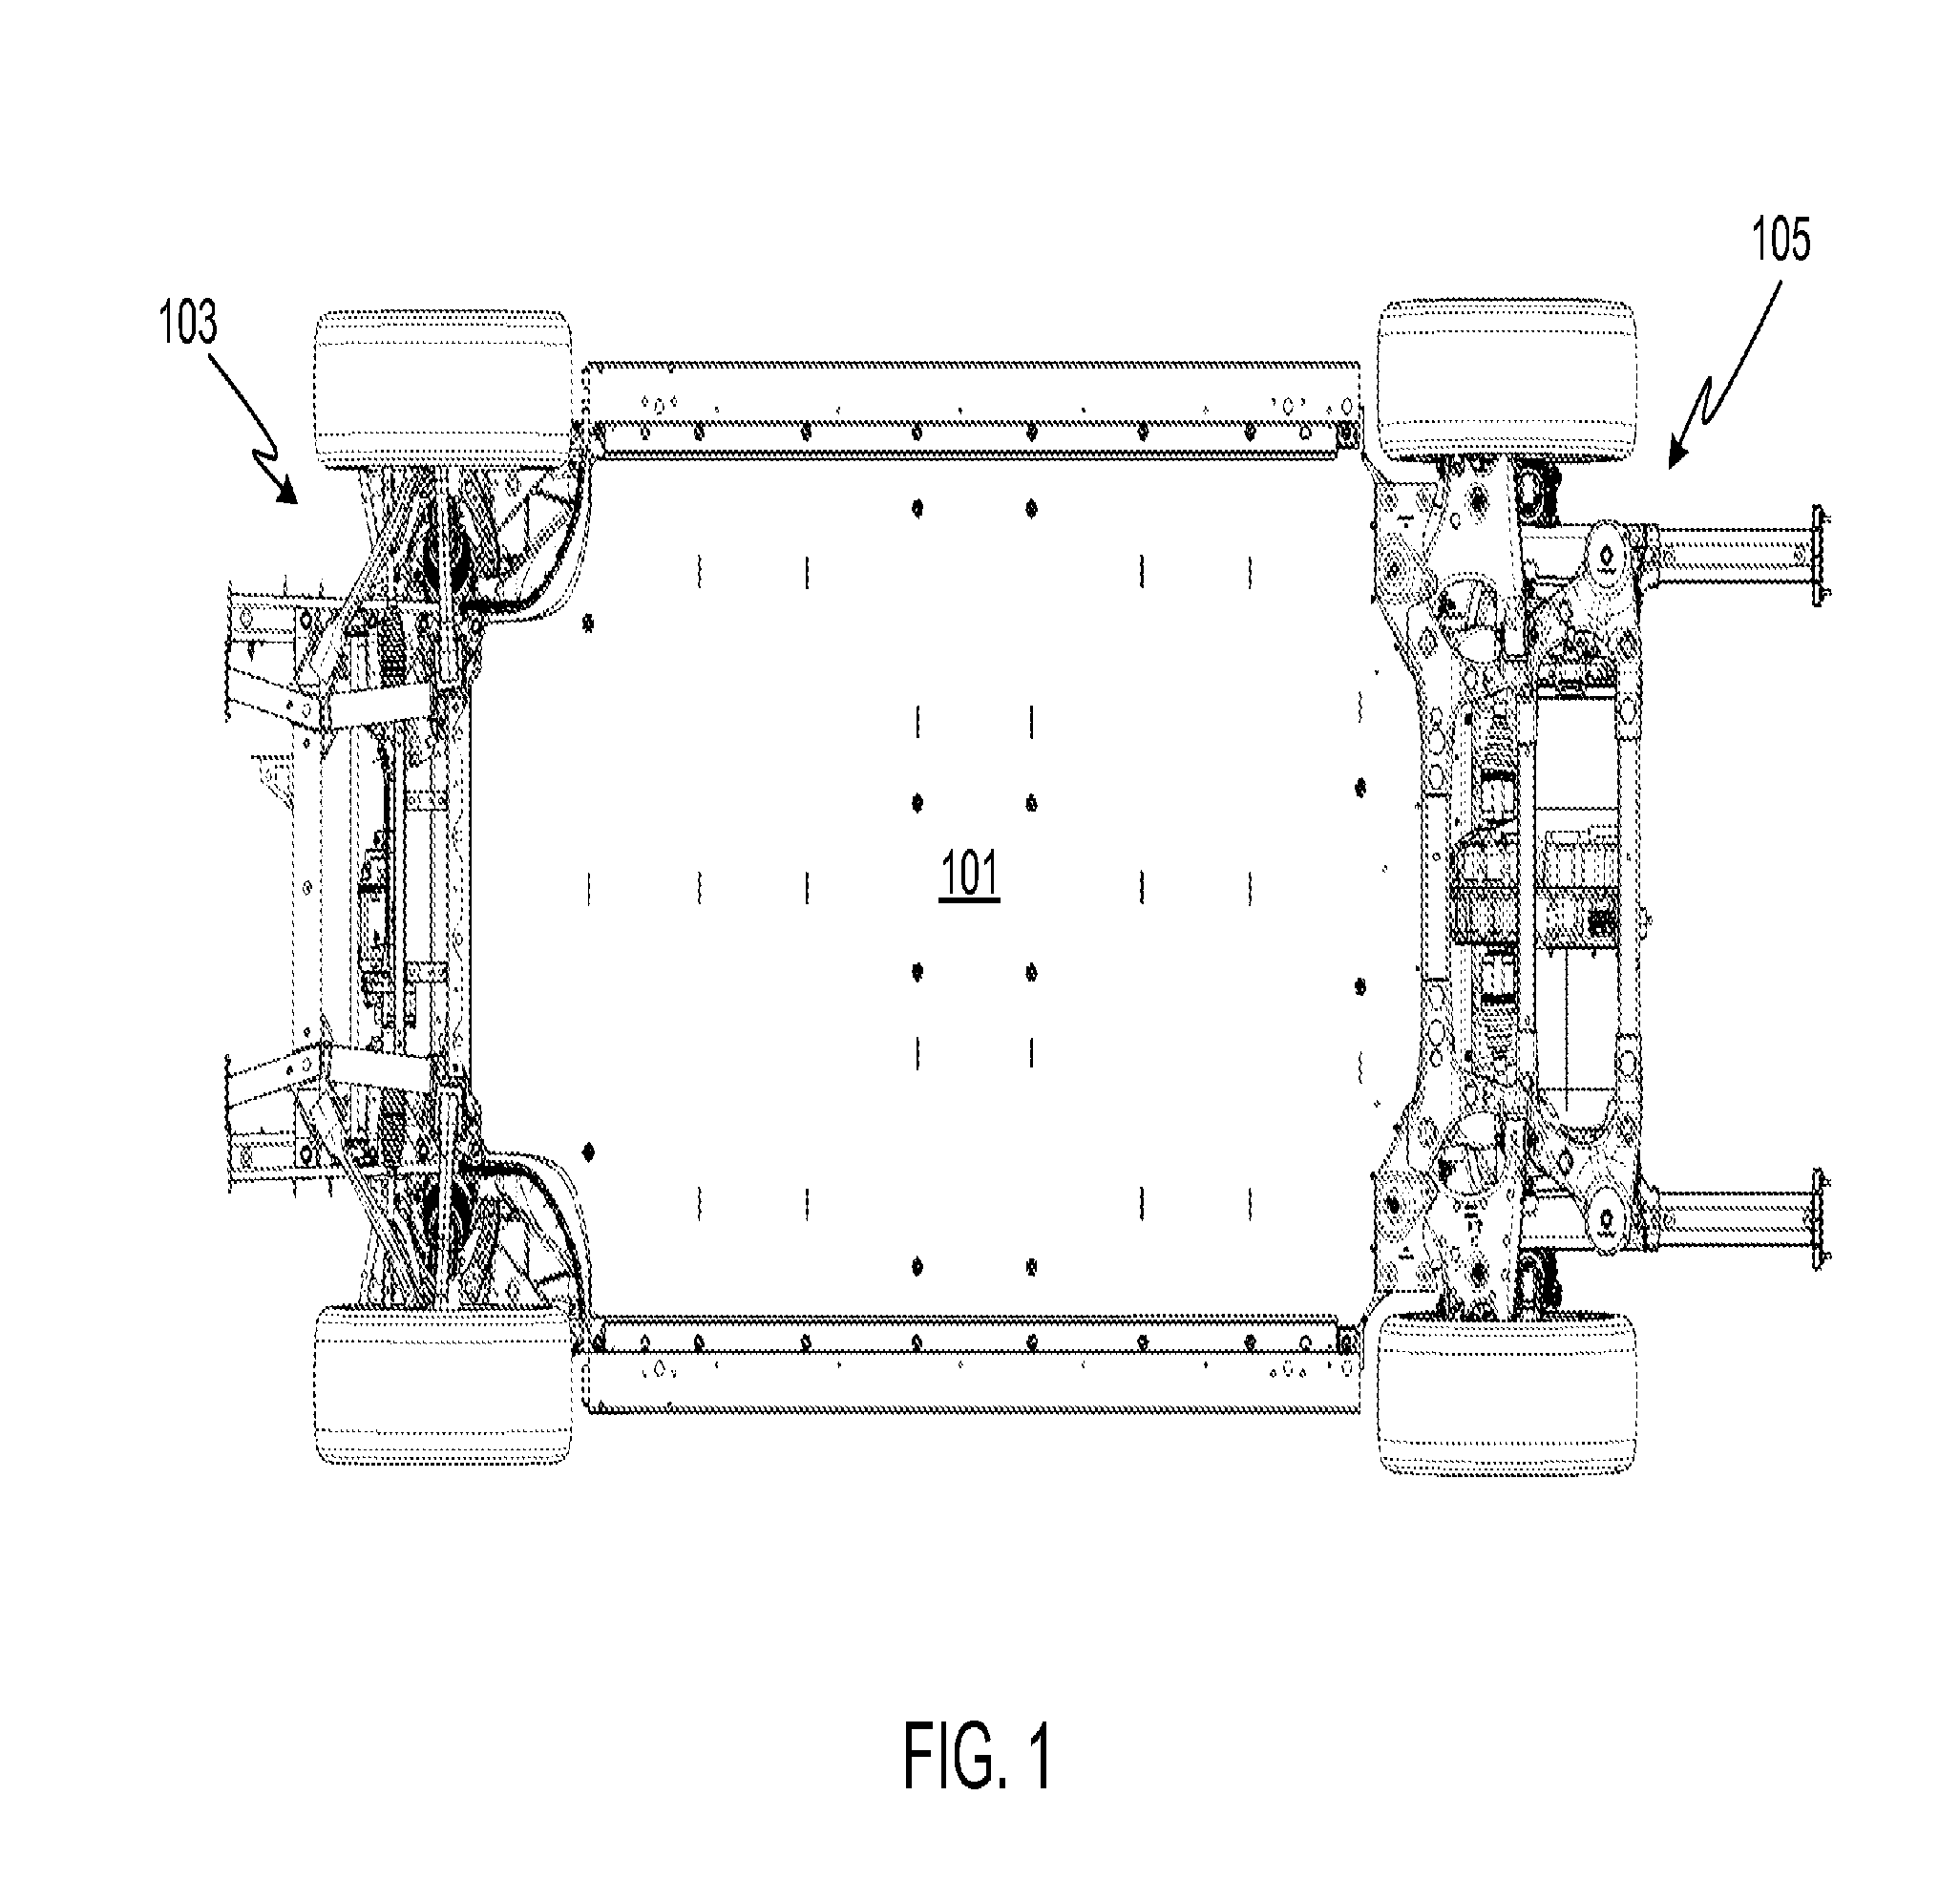 System for absorbing and distributing side impact energy utilizing an integrated battery pack